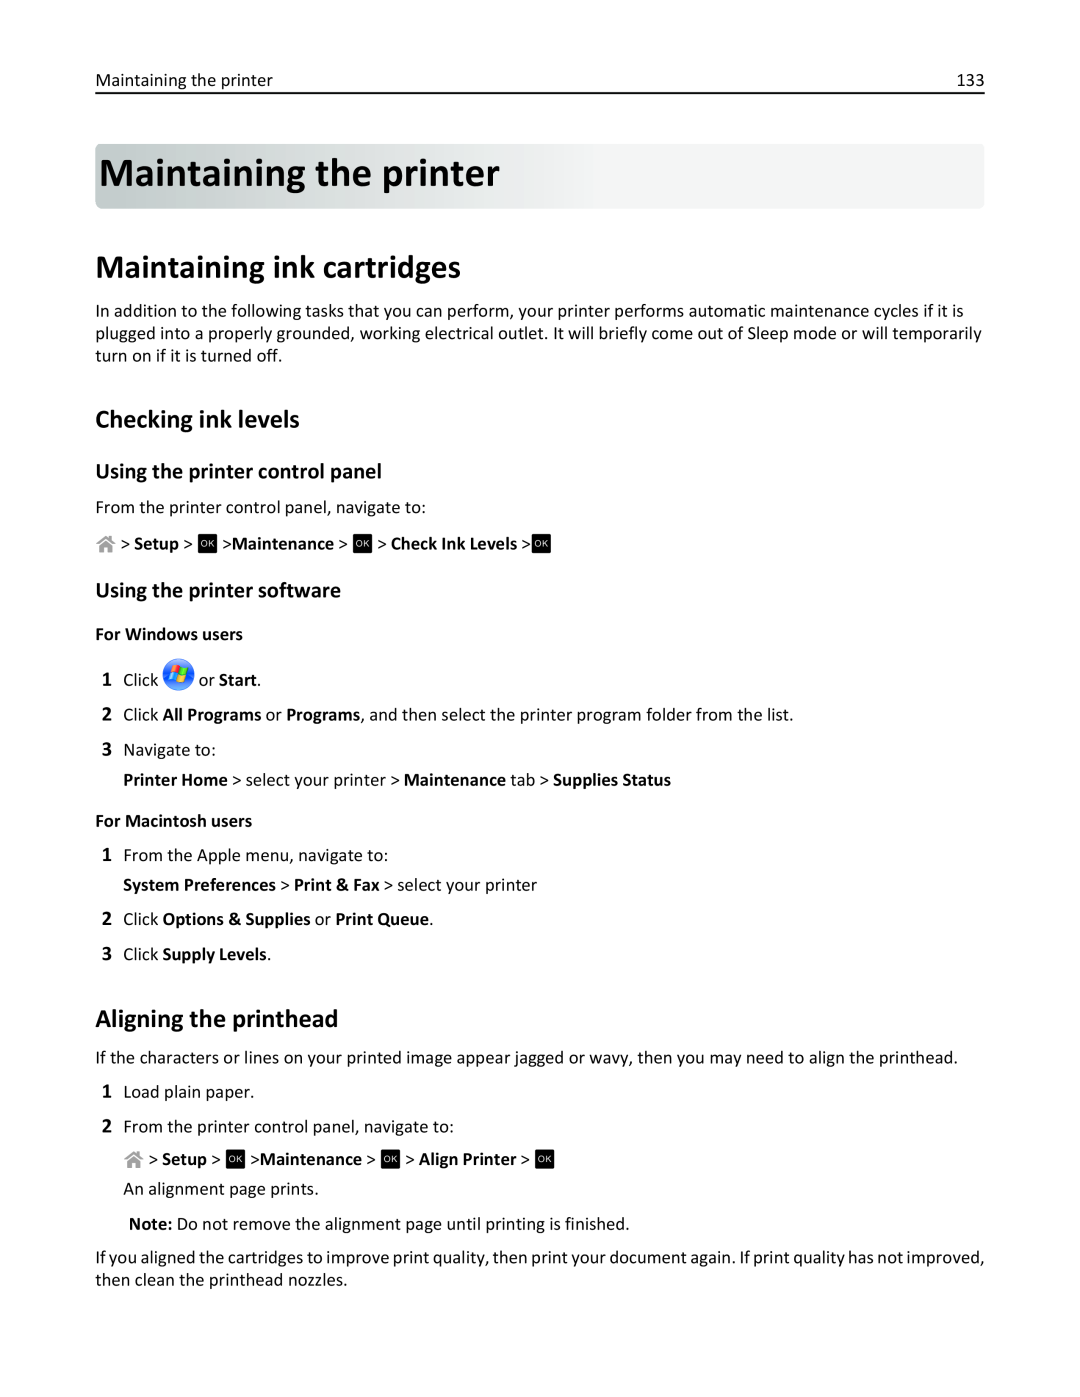 Lexmark PRO4000C manual Maintaining the printer, Maintaining ink cartridges, Checking ink levels, Aligning the printhead 